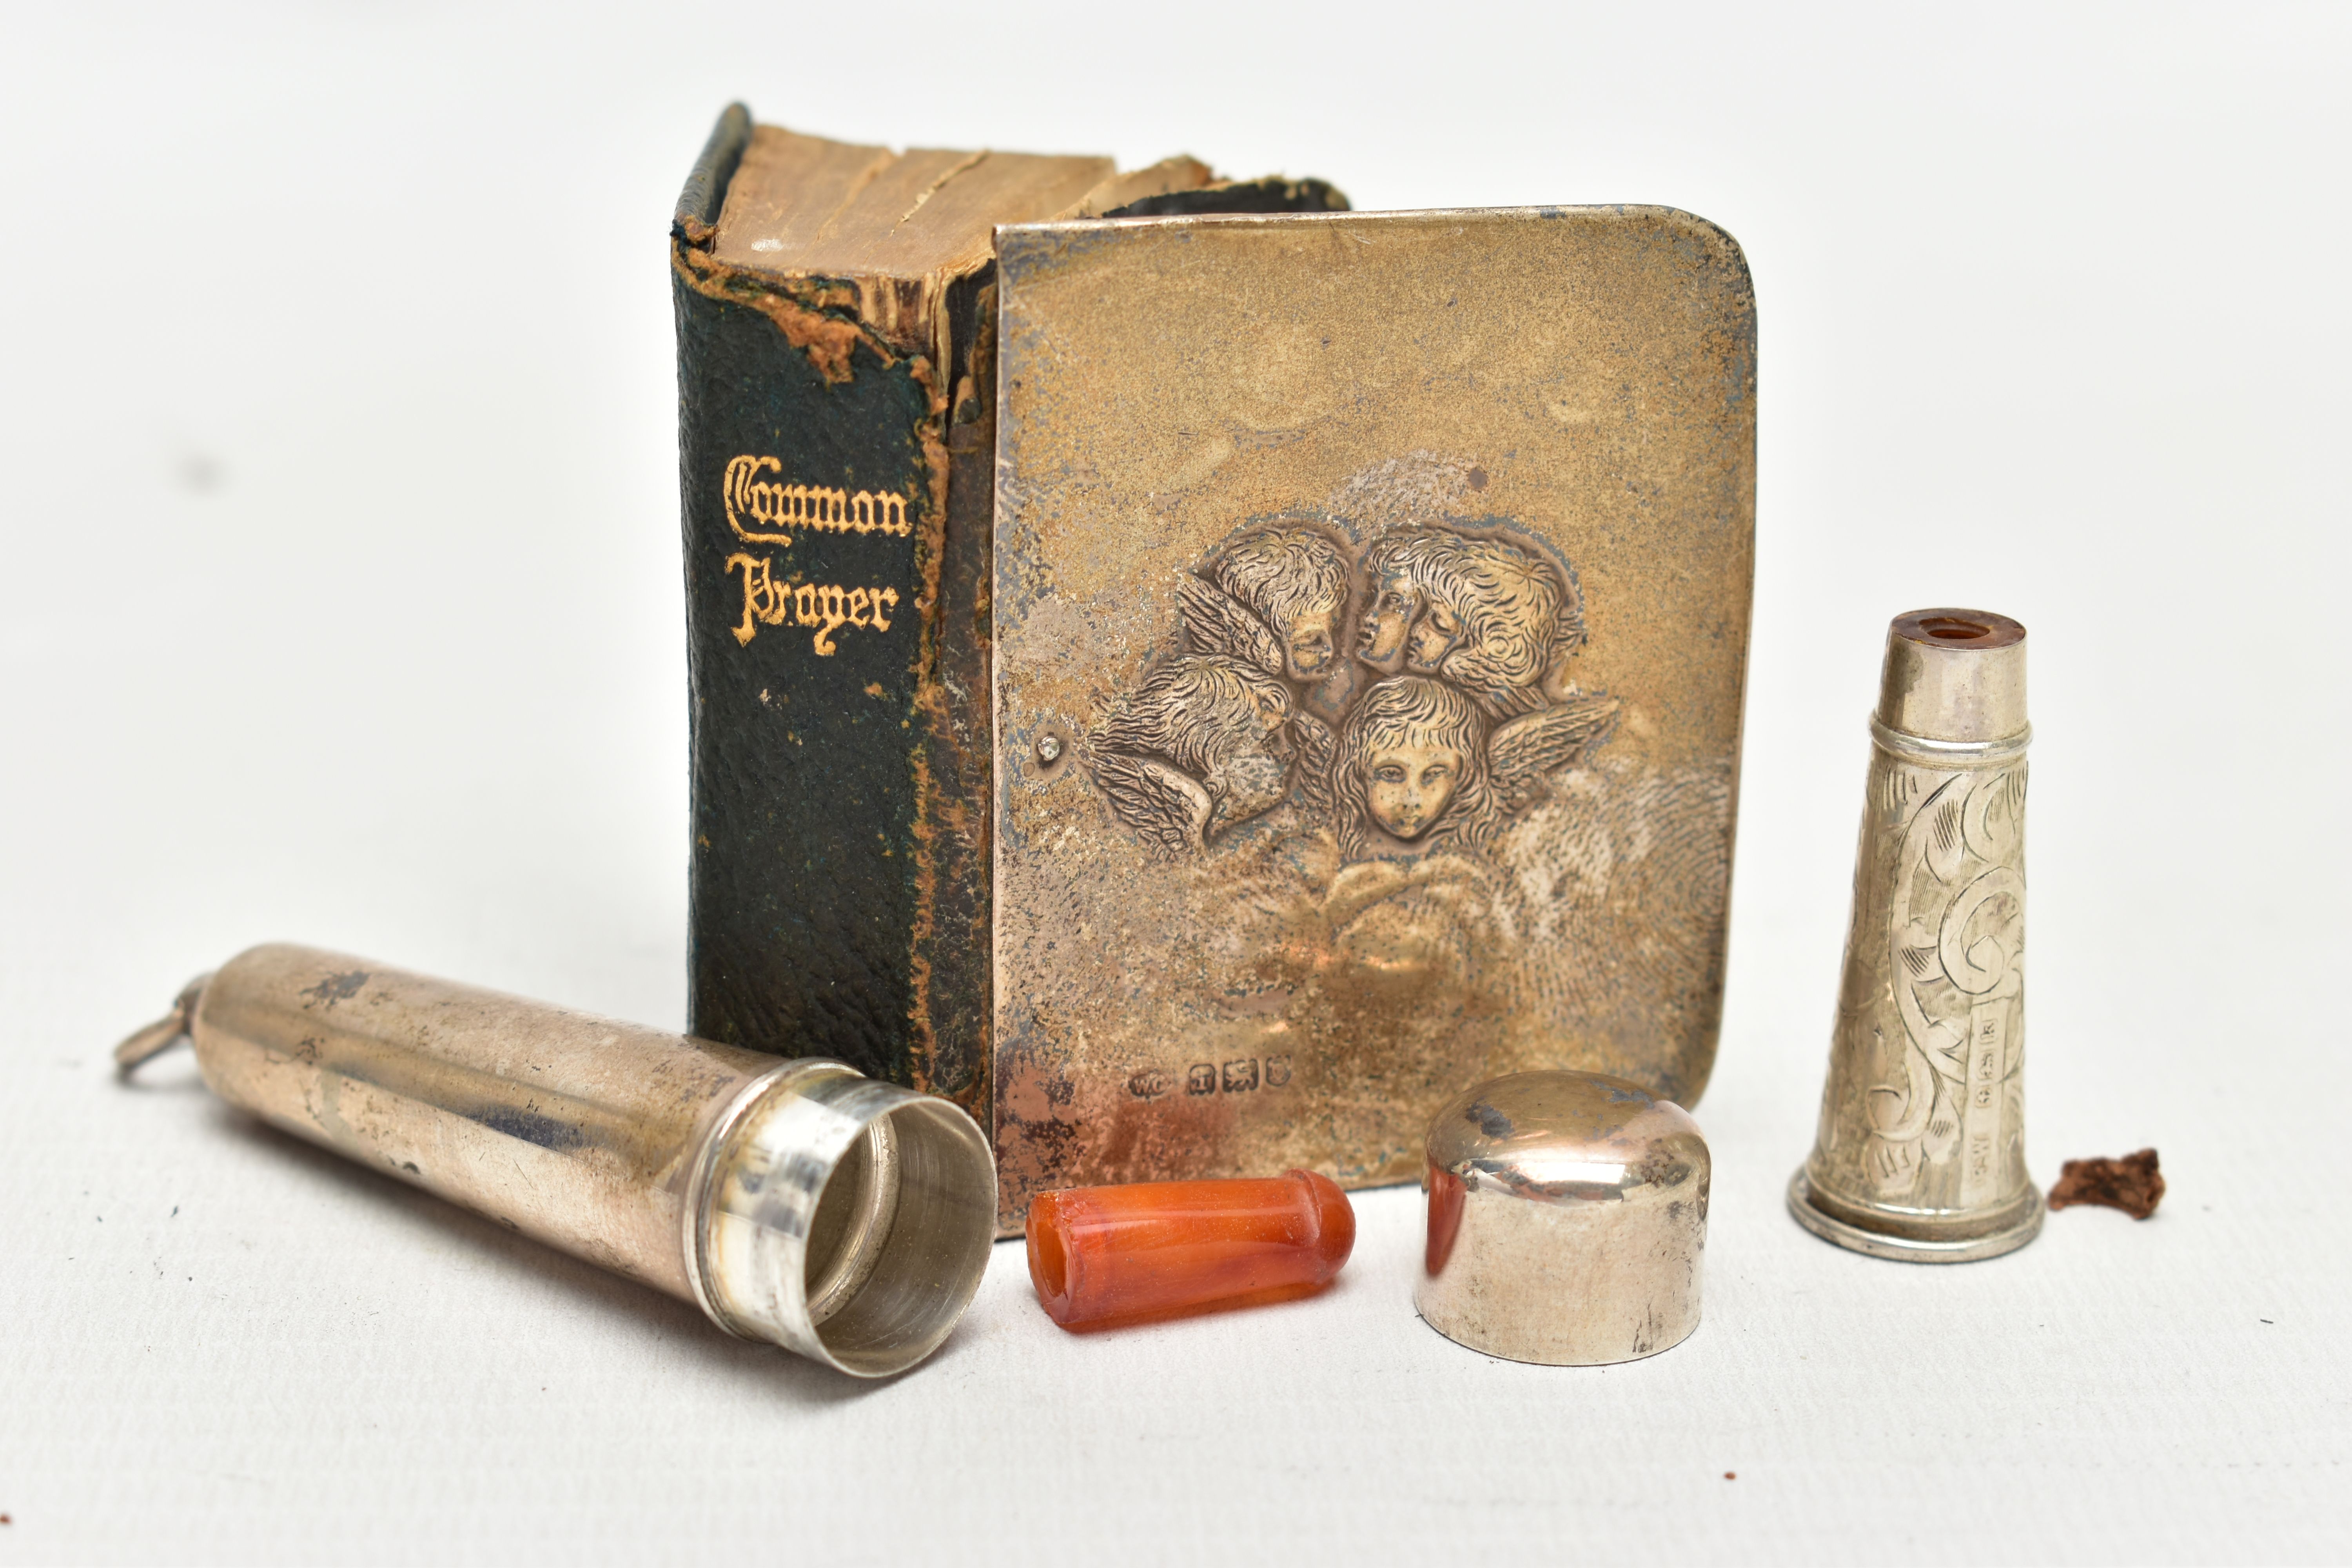 A SILVER PRAYER BOOK AND CIGAR HOLDER, the book with silver front panel depicting five Cherubs, - Image 4 of 4